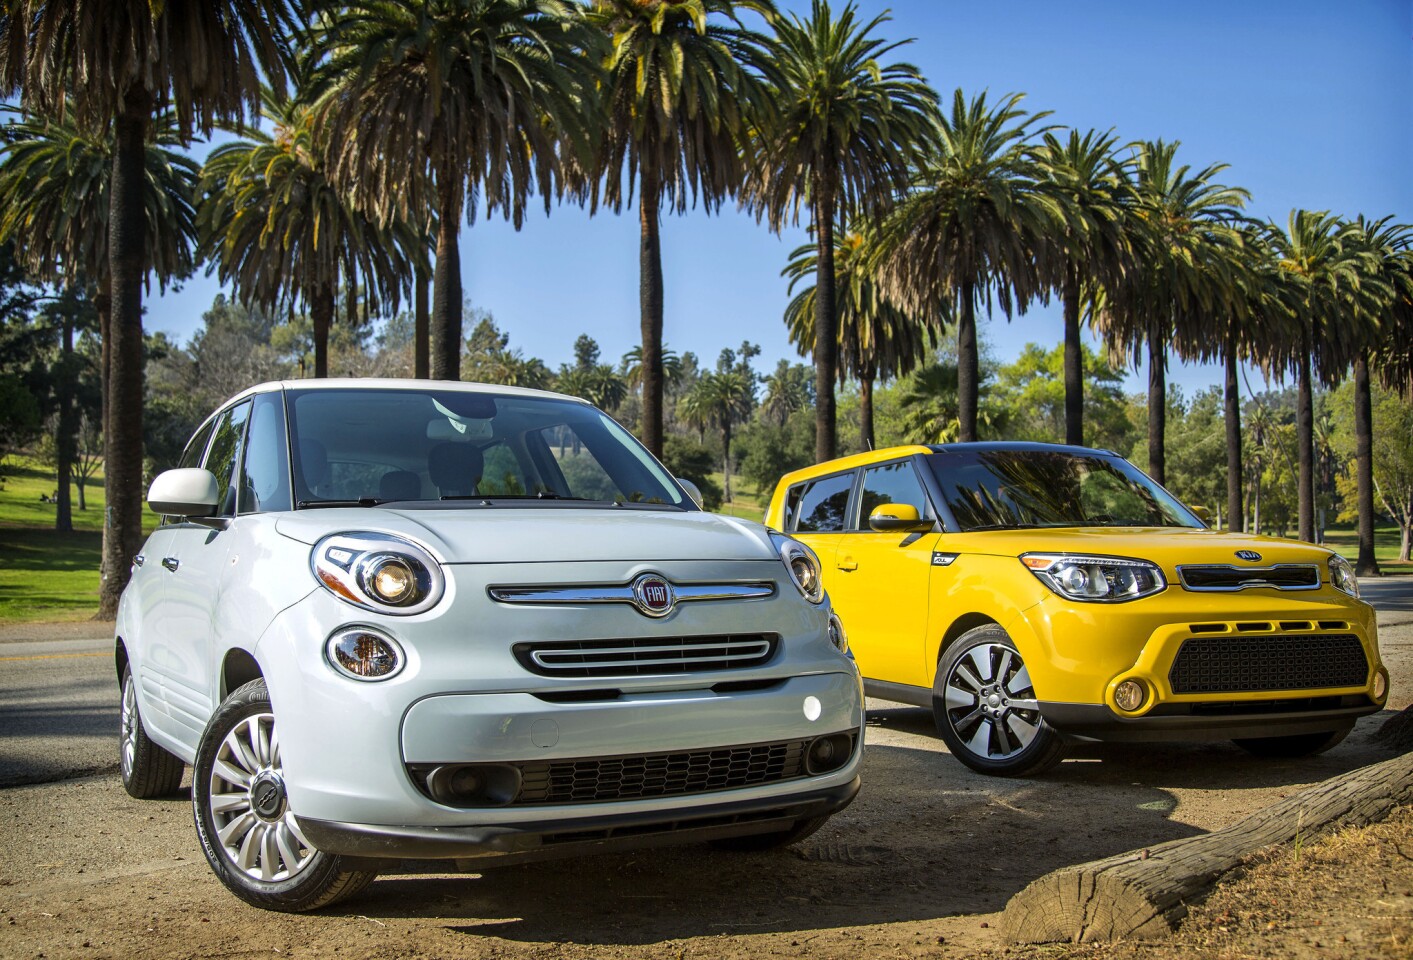 The all-new Fiat 500L, left, and the redesigned Kia Soul are in a quirky "toaster" class of subcompact cars that also includes the Nissan Cube and Juke, and the Scion xB.